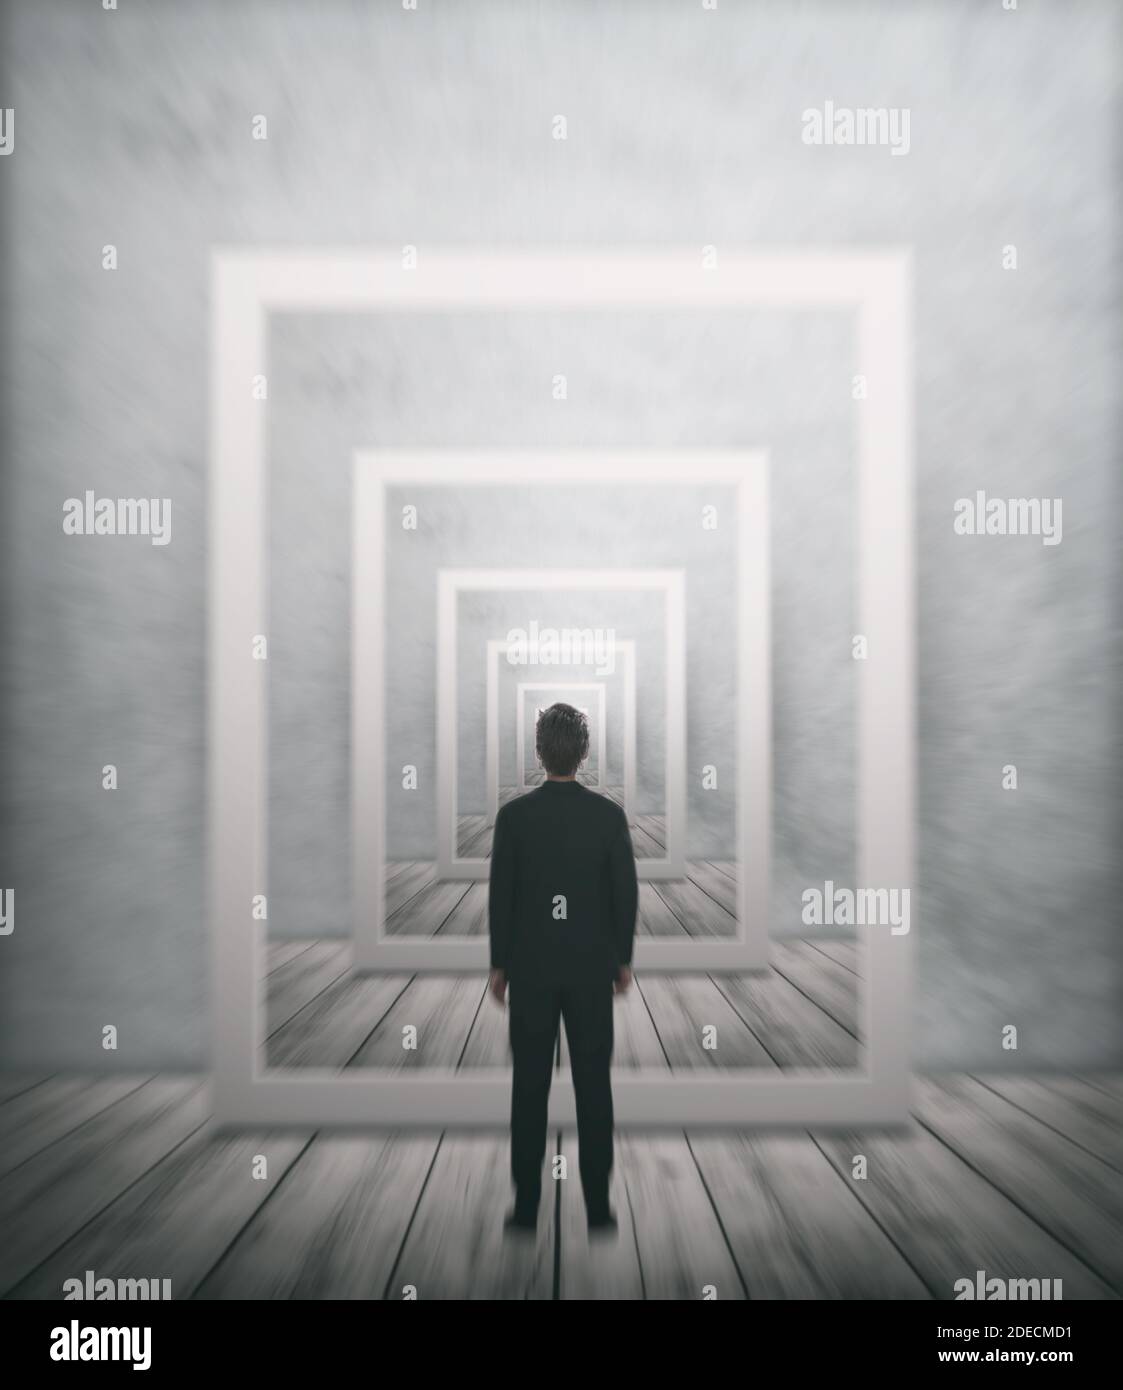 Business man standing in front of endless repeating picture frame, motion blur effect Stock Photo